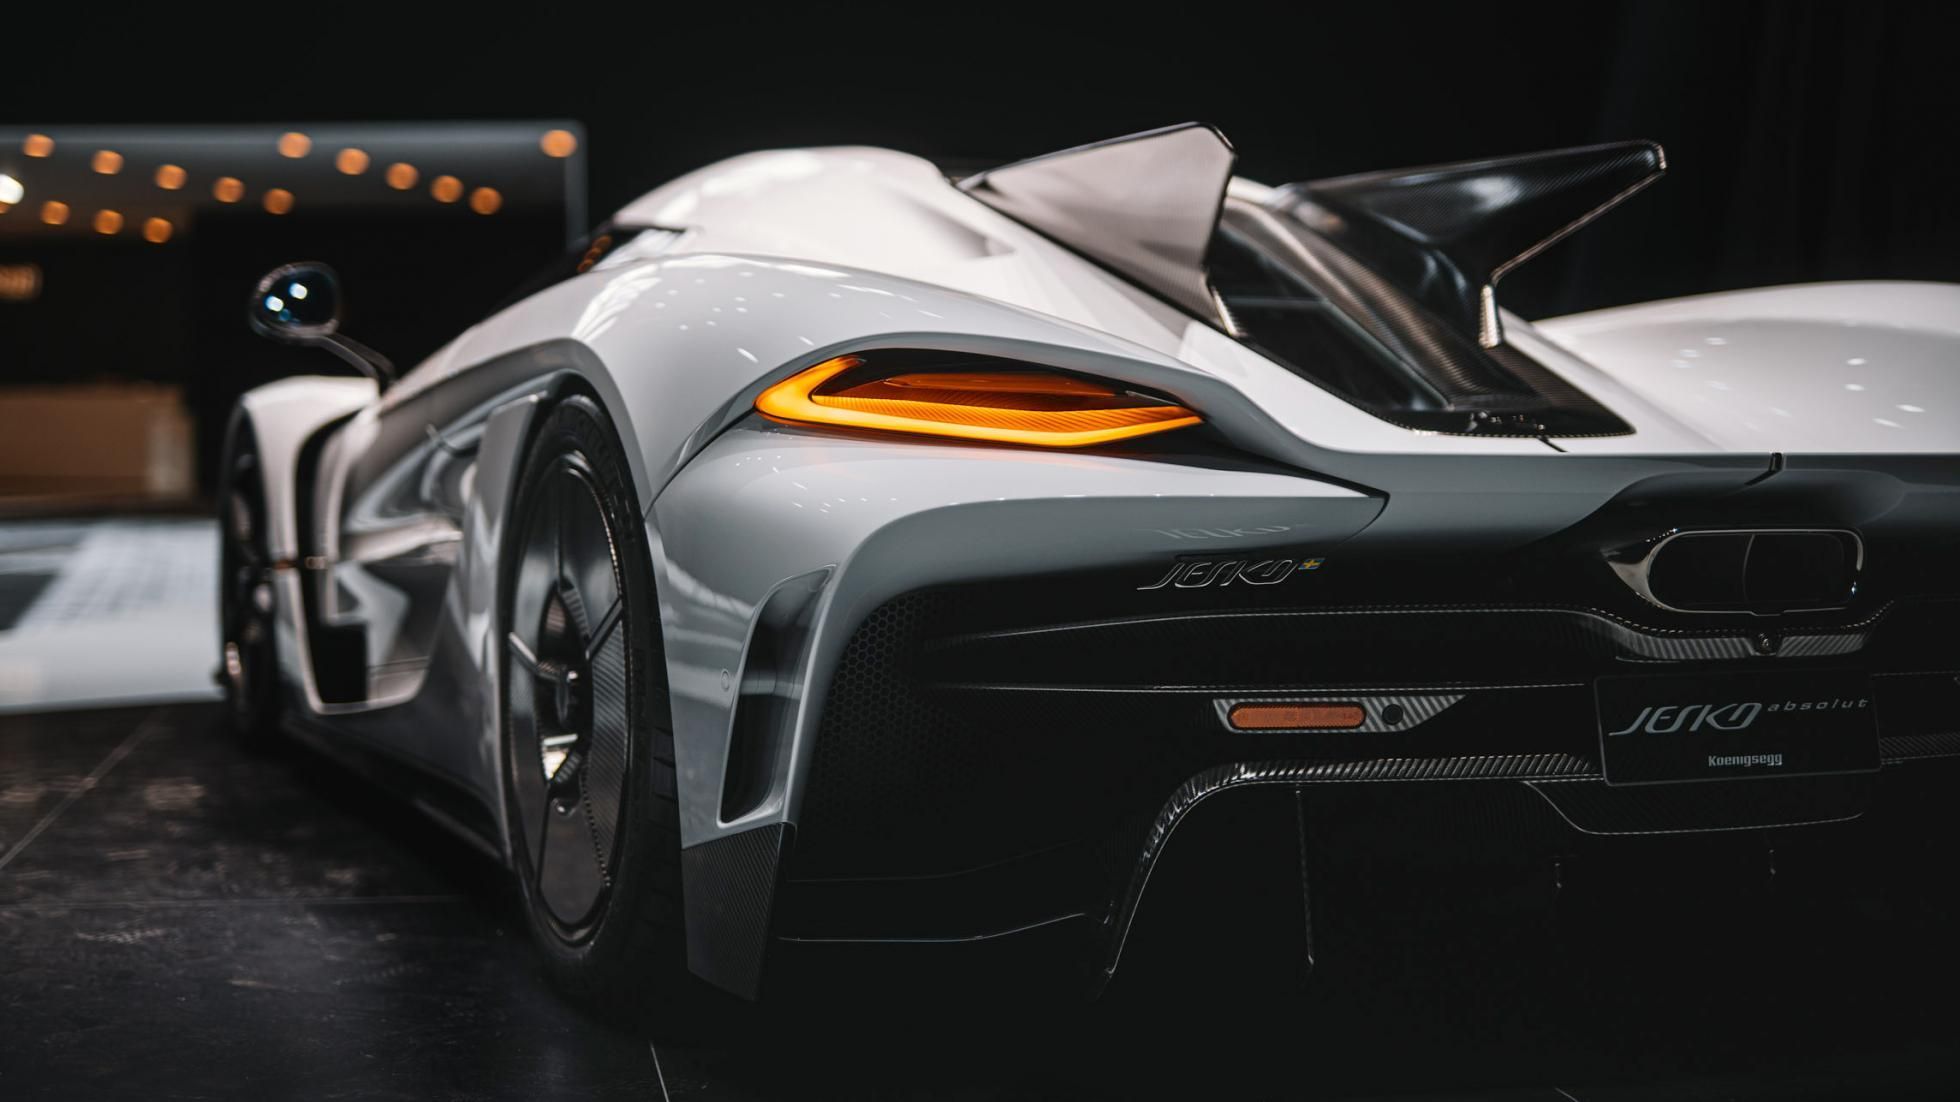 The new Jesko Absolut is the fastest ever Koenigsegg in 2020